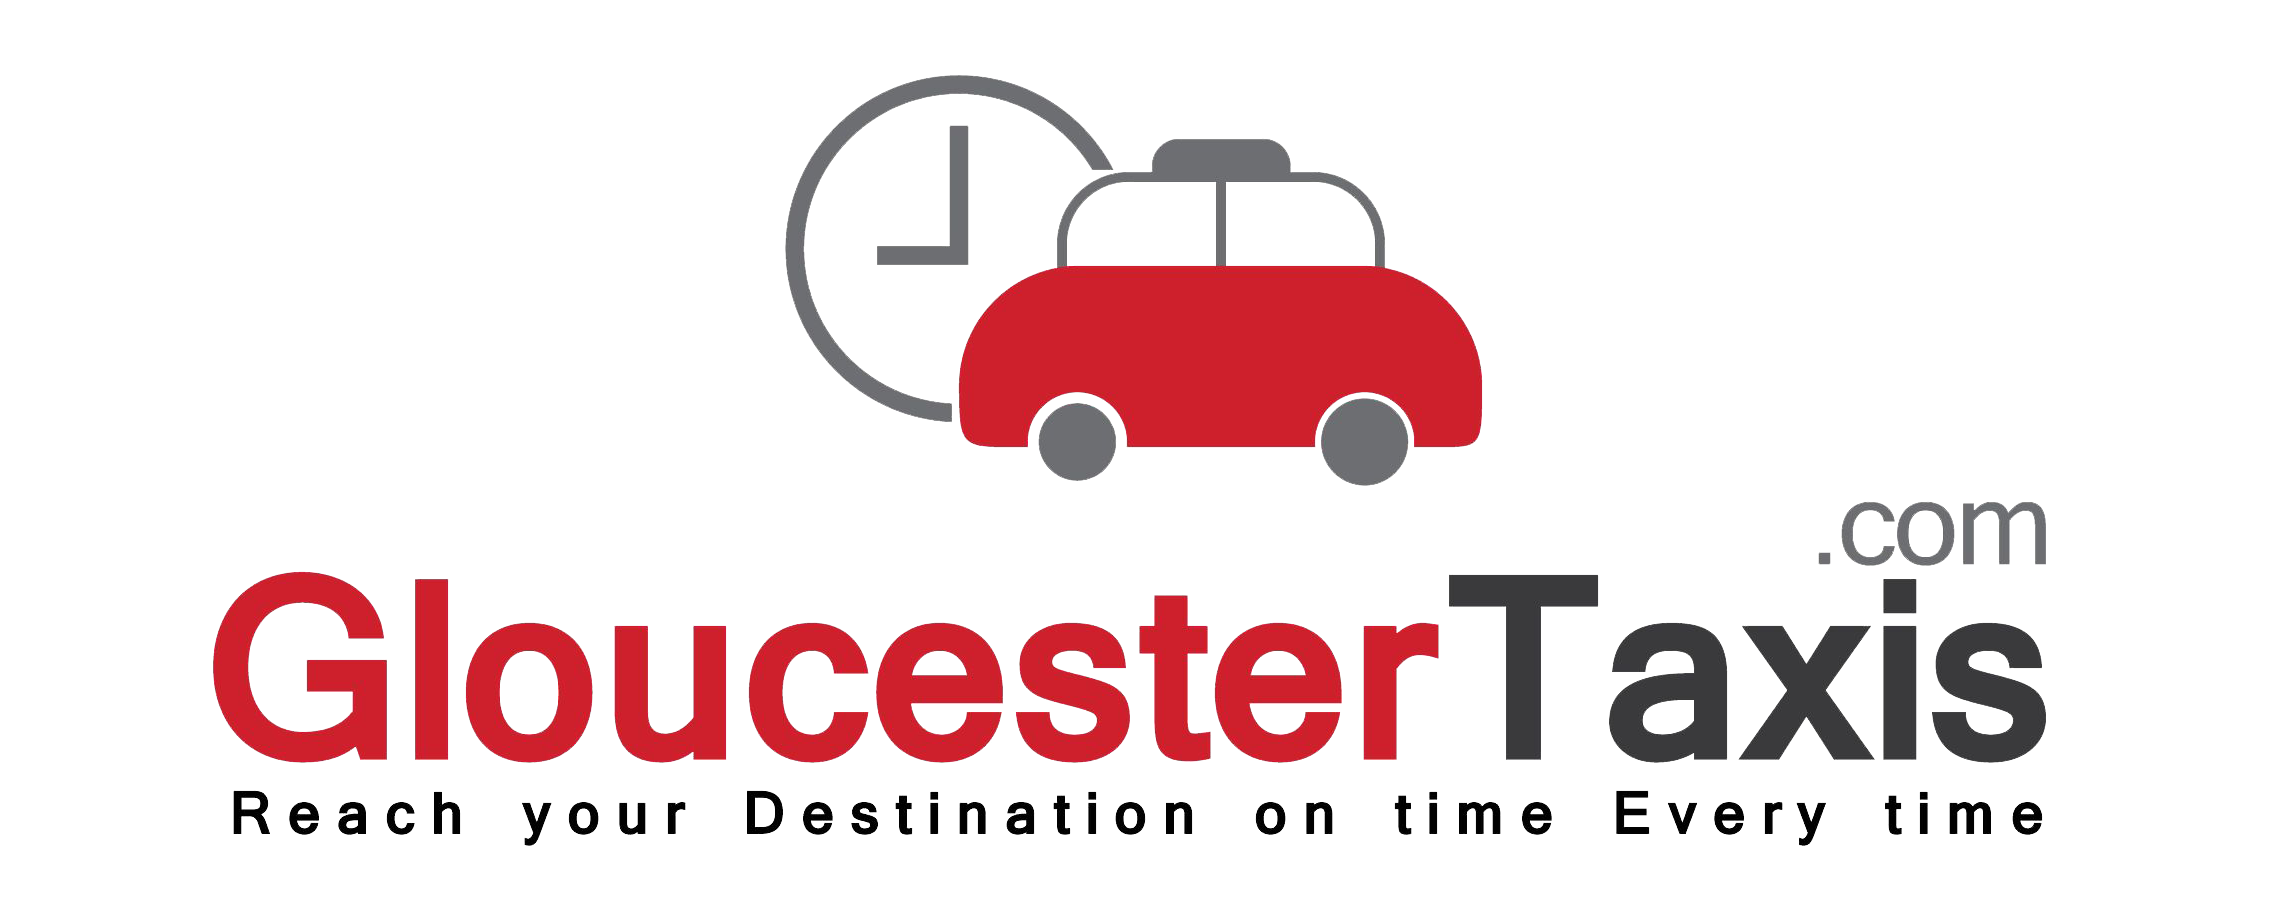 Gloucester Taxis - Gloucester's Local, Reliable & Safe Taxi Service | Taxi Gloucester, Gloucester Taxi, Gloucester Taxis, Taxis Gloucester